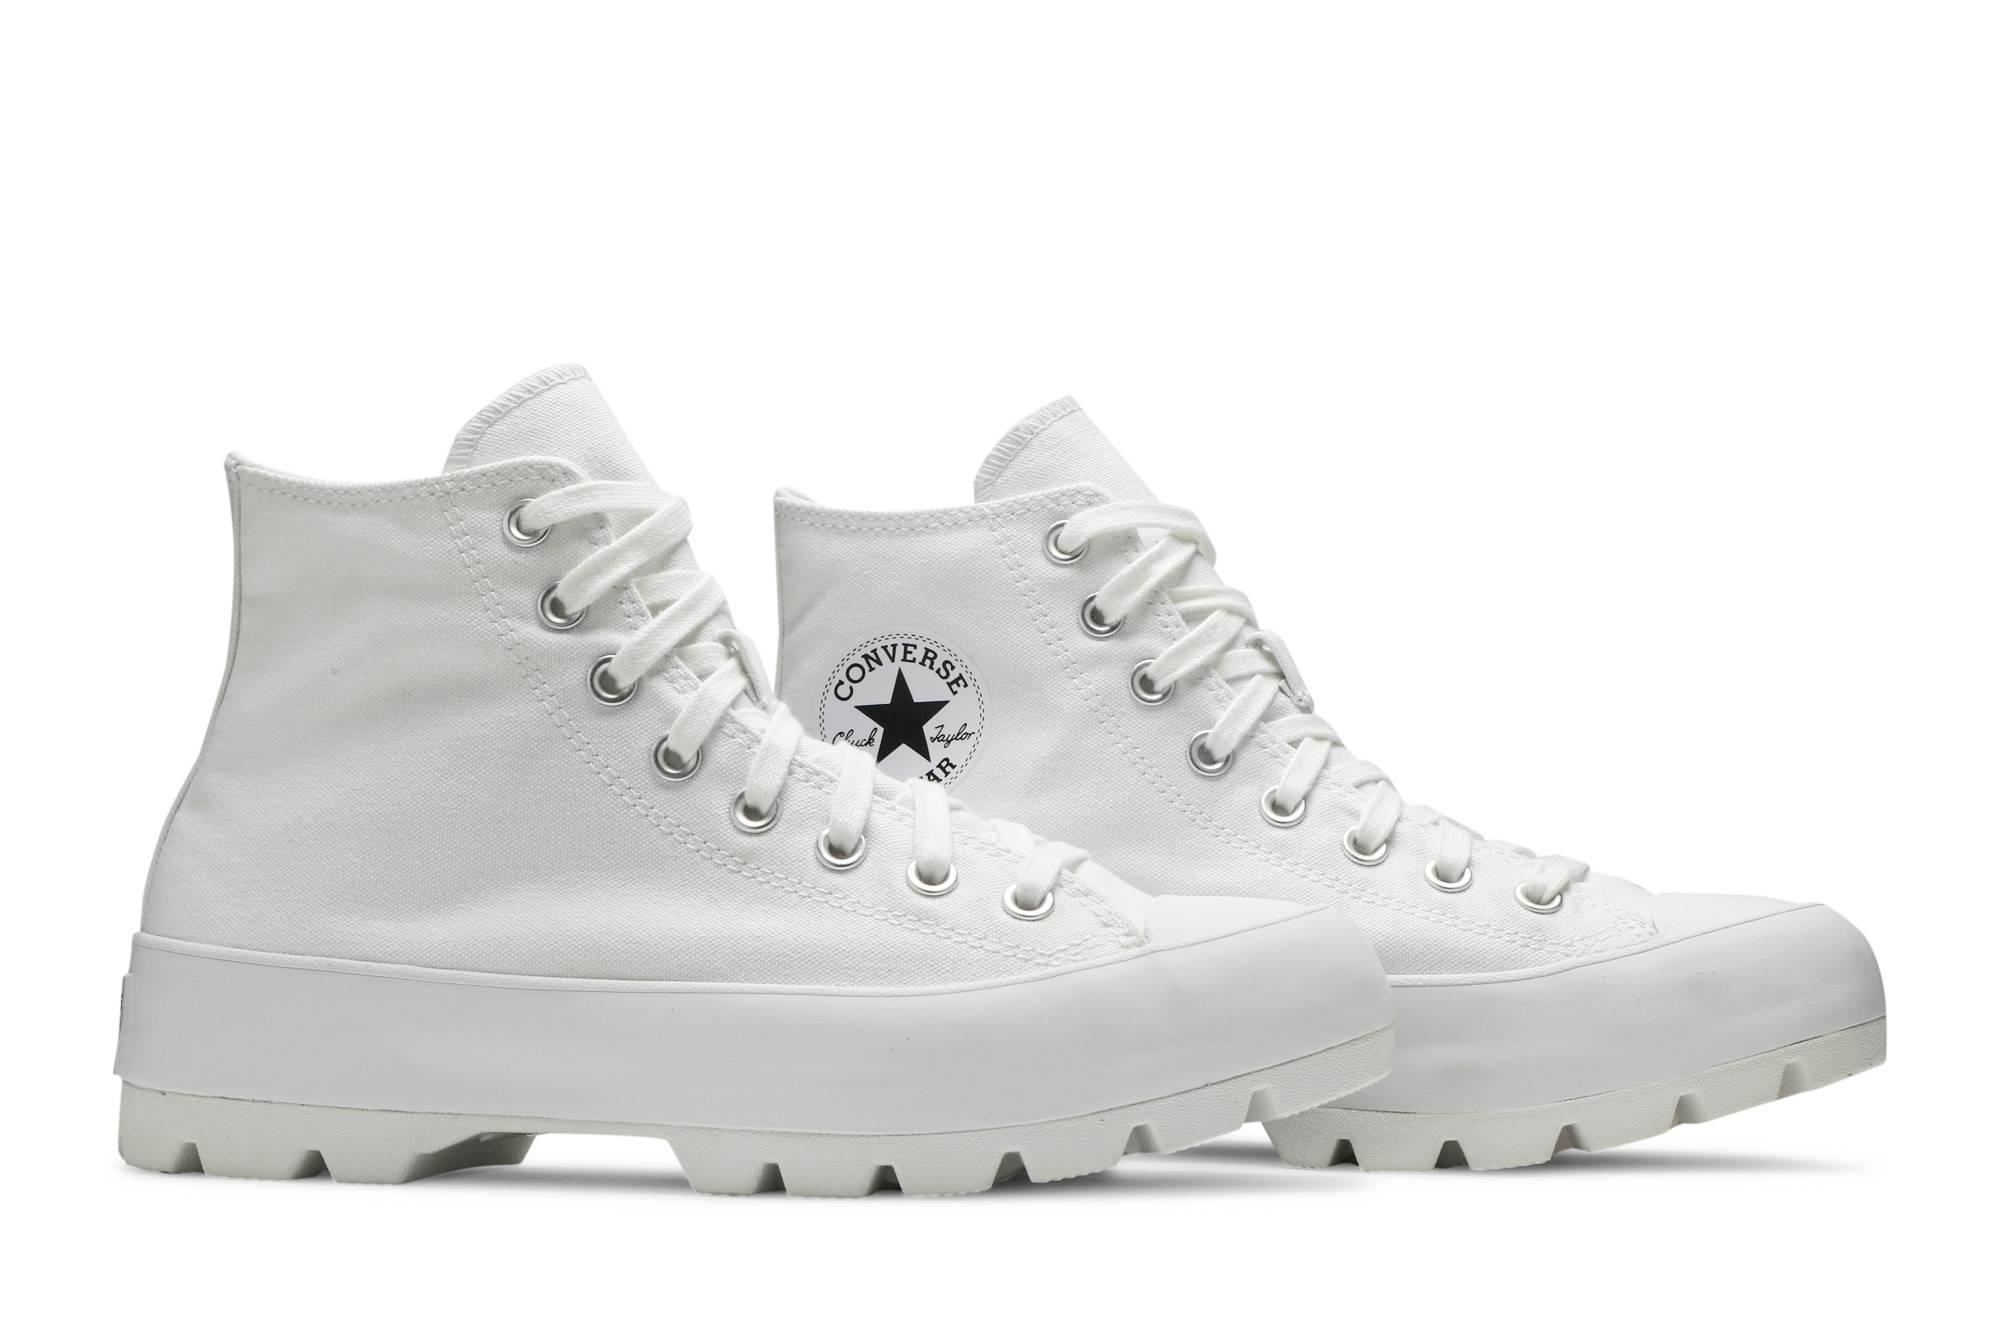 Converse Fleece Chuck Taylor All Star Lugged - Hi in White/Black (White ...